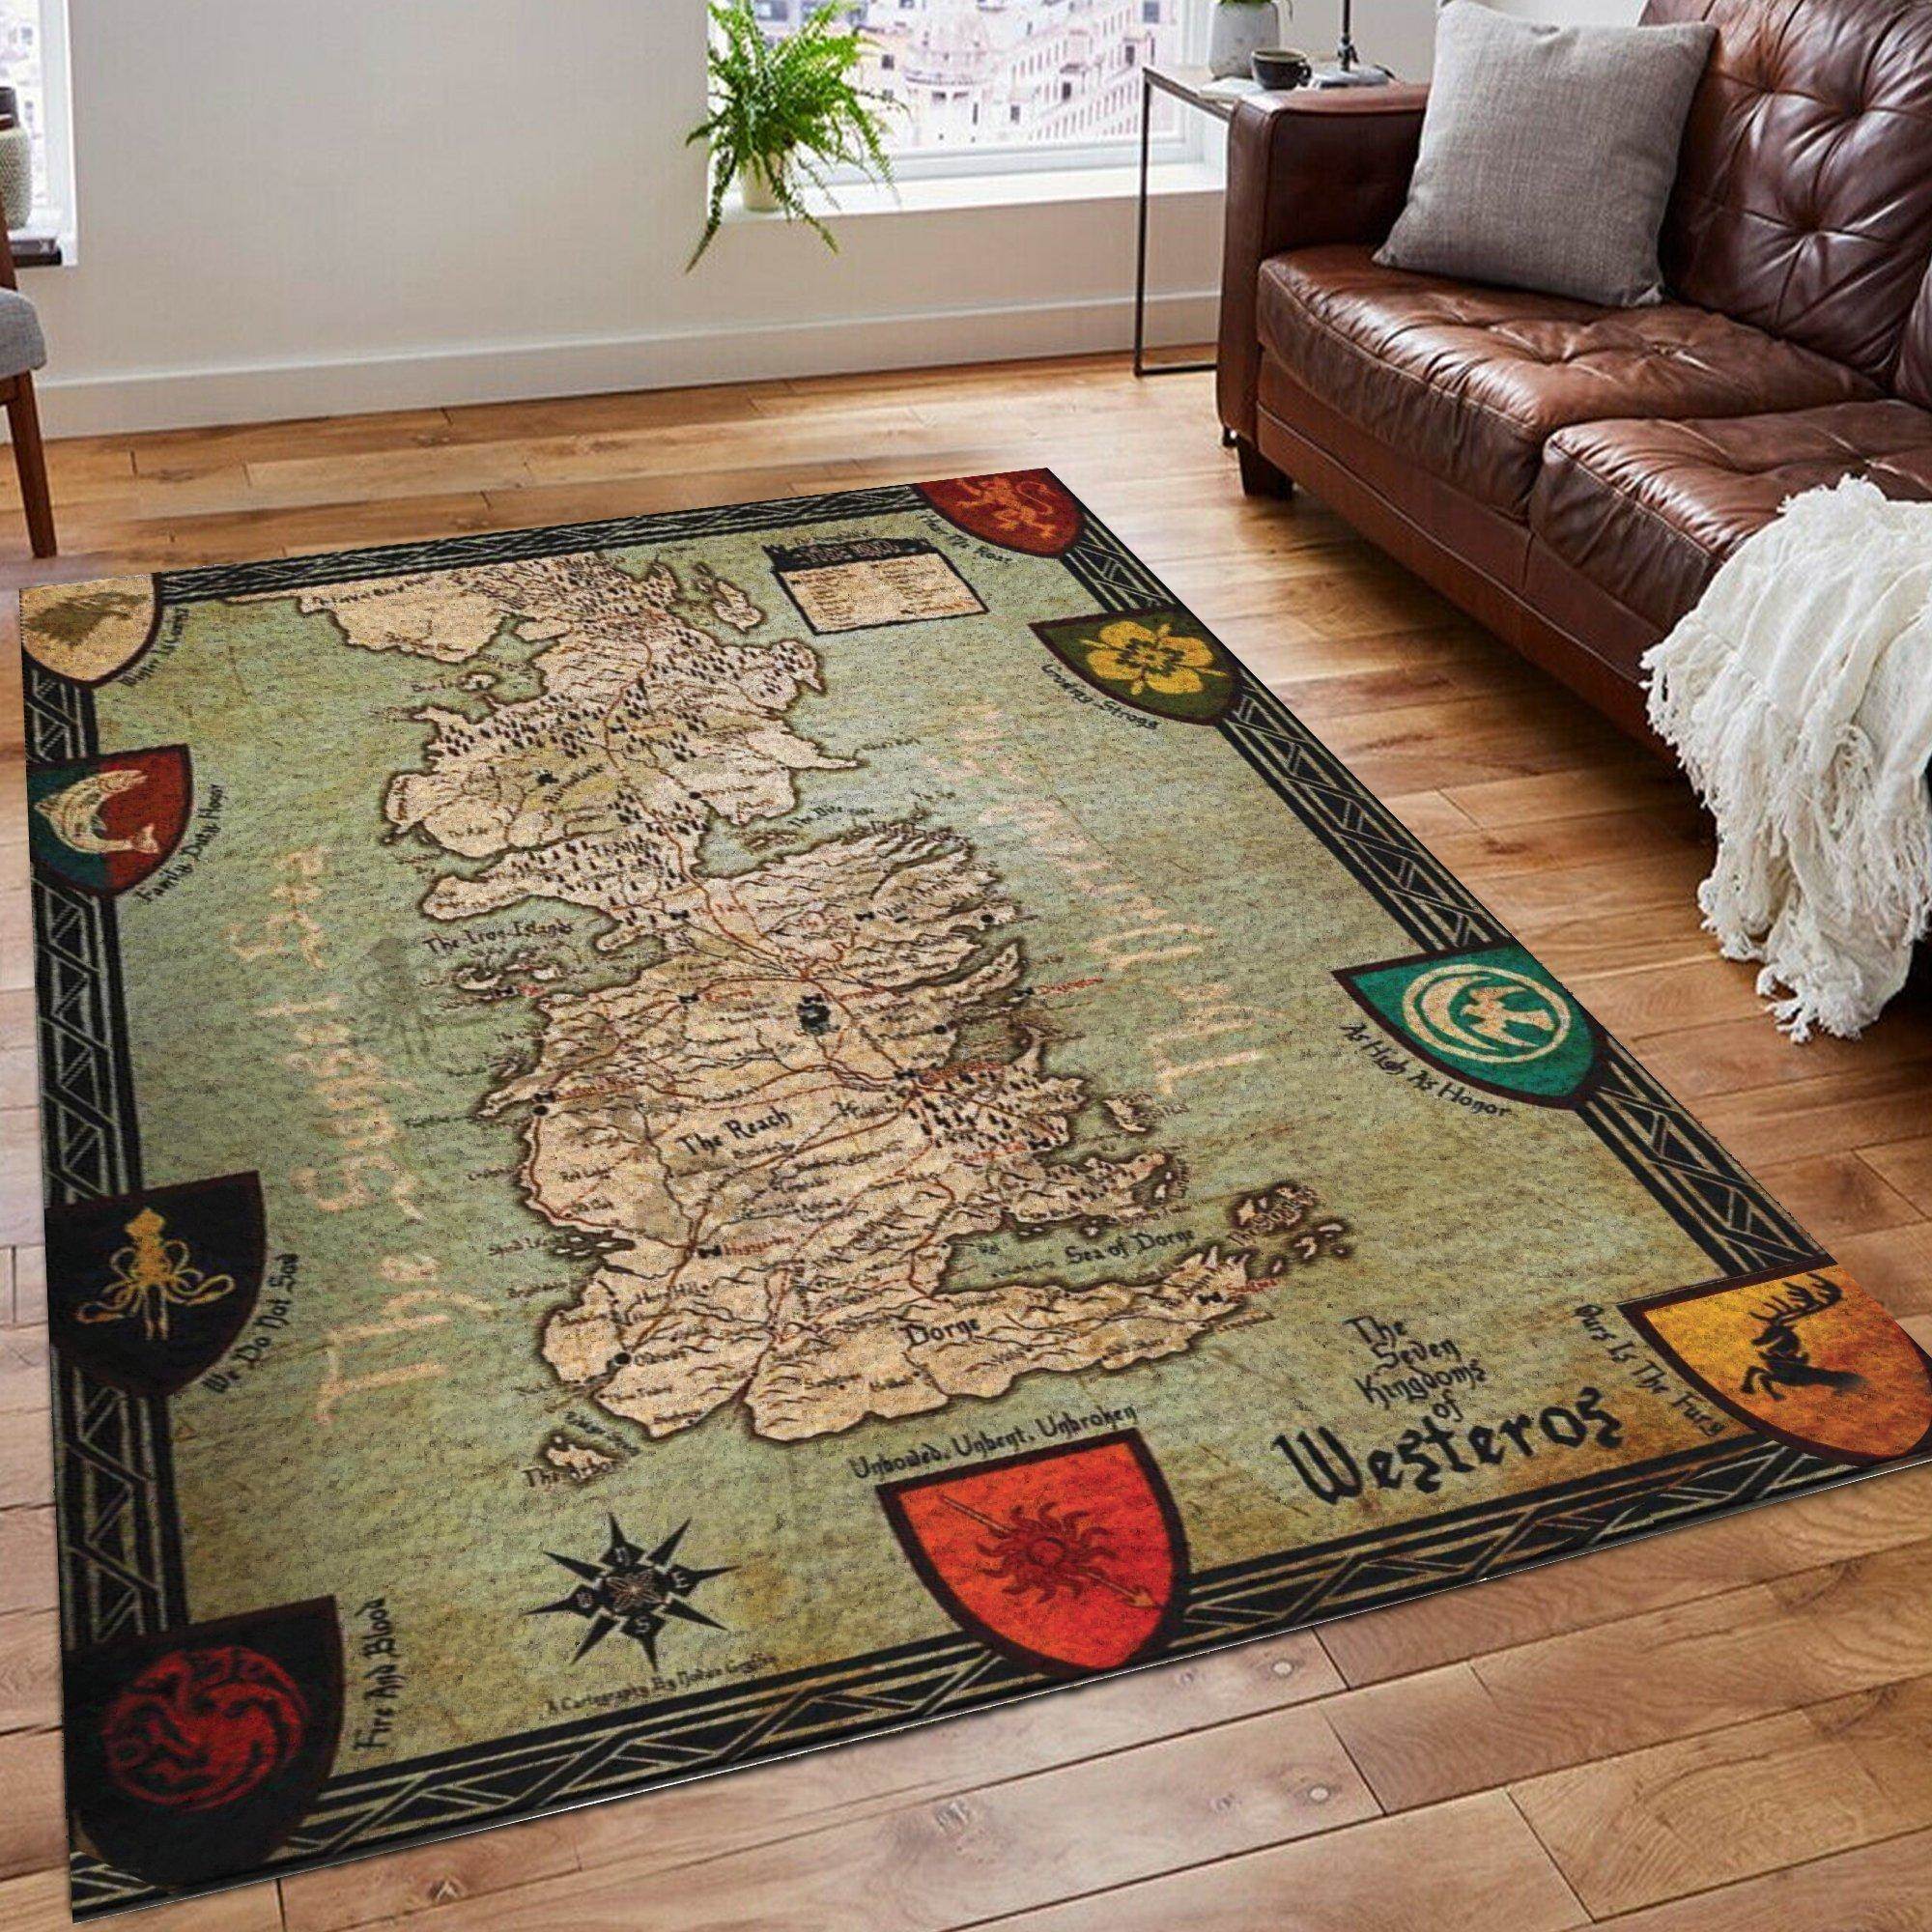 B Dragon And She Limited Edition Amazon Best Seller Sku 268001 Rug